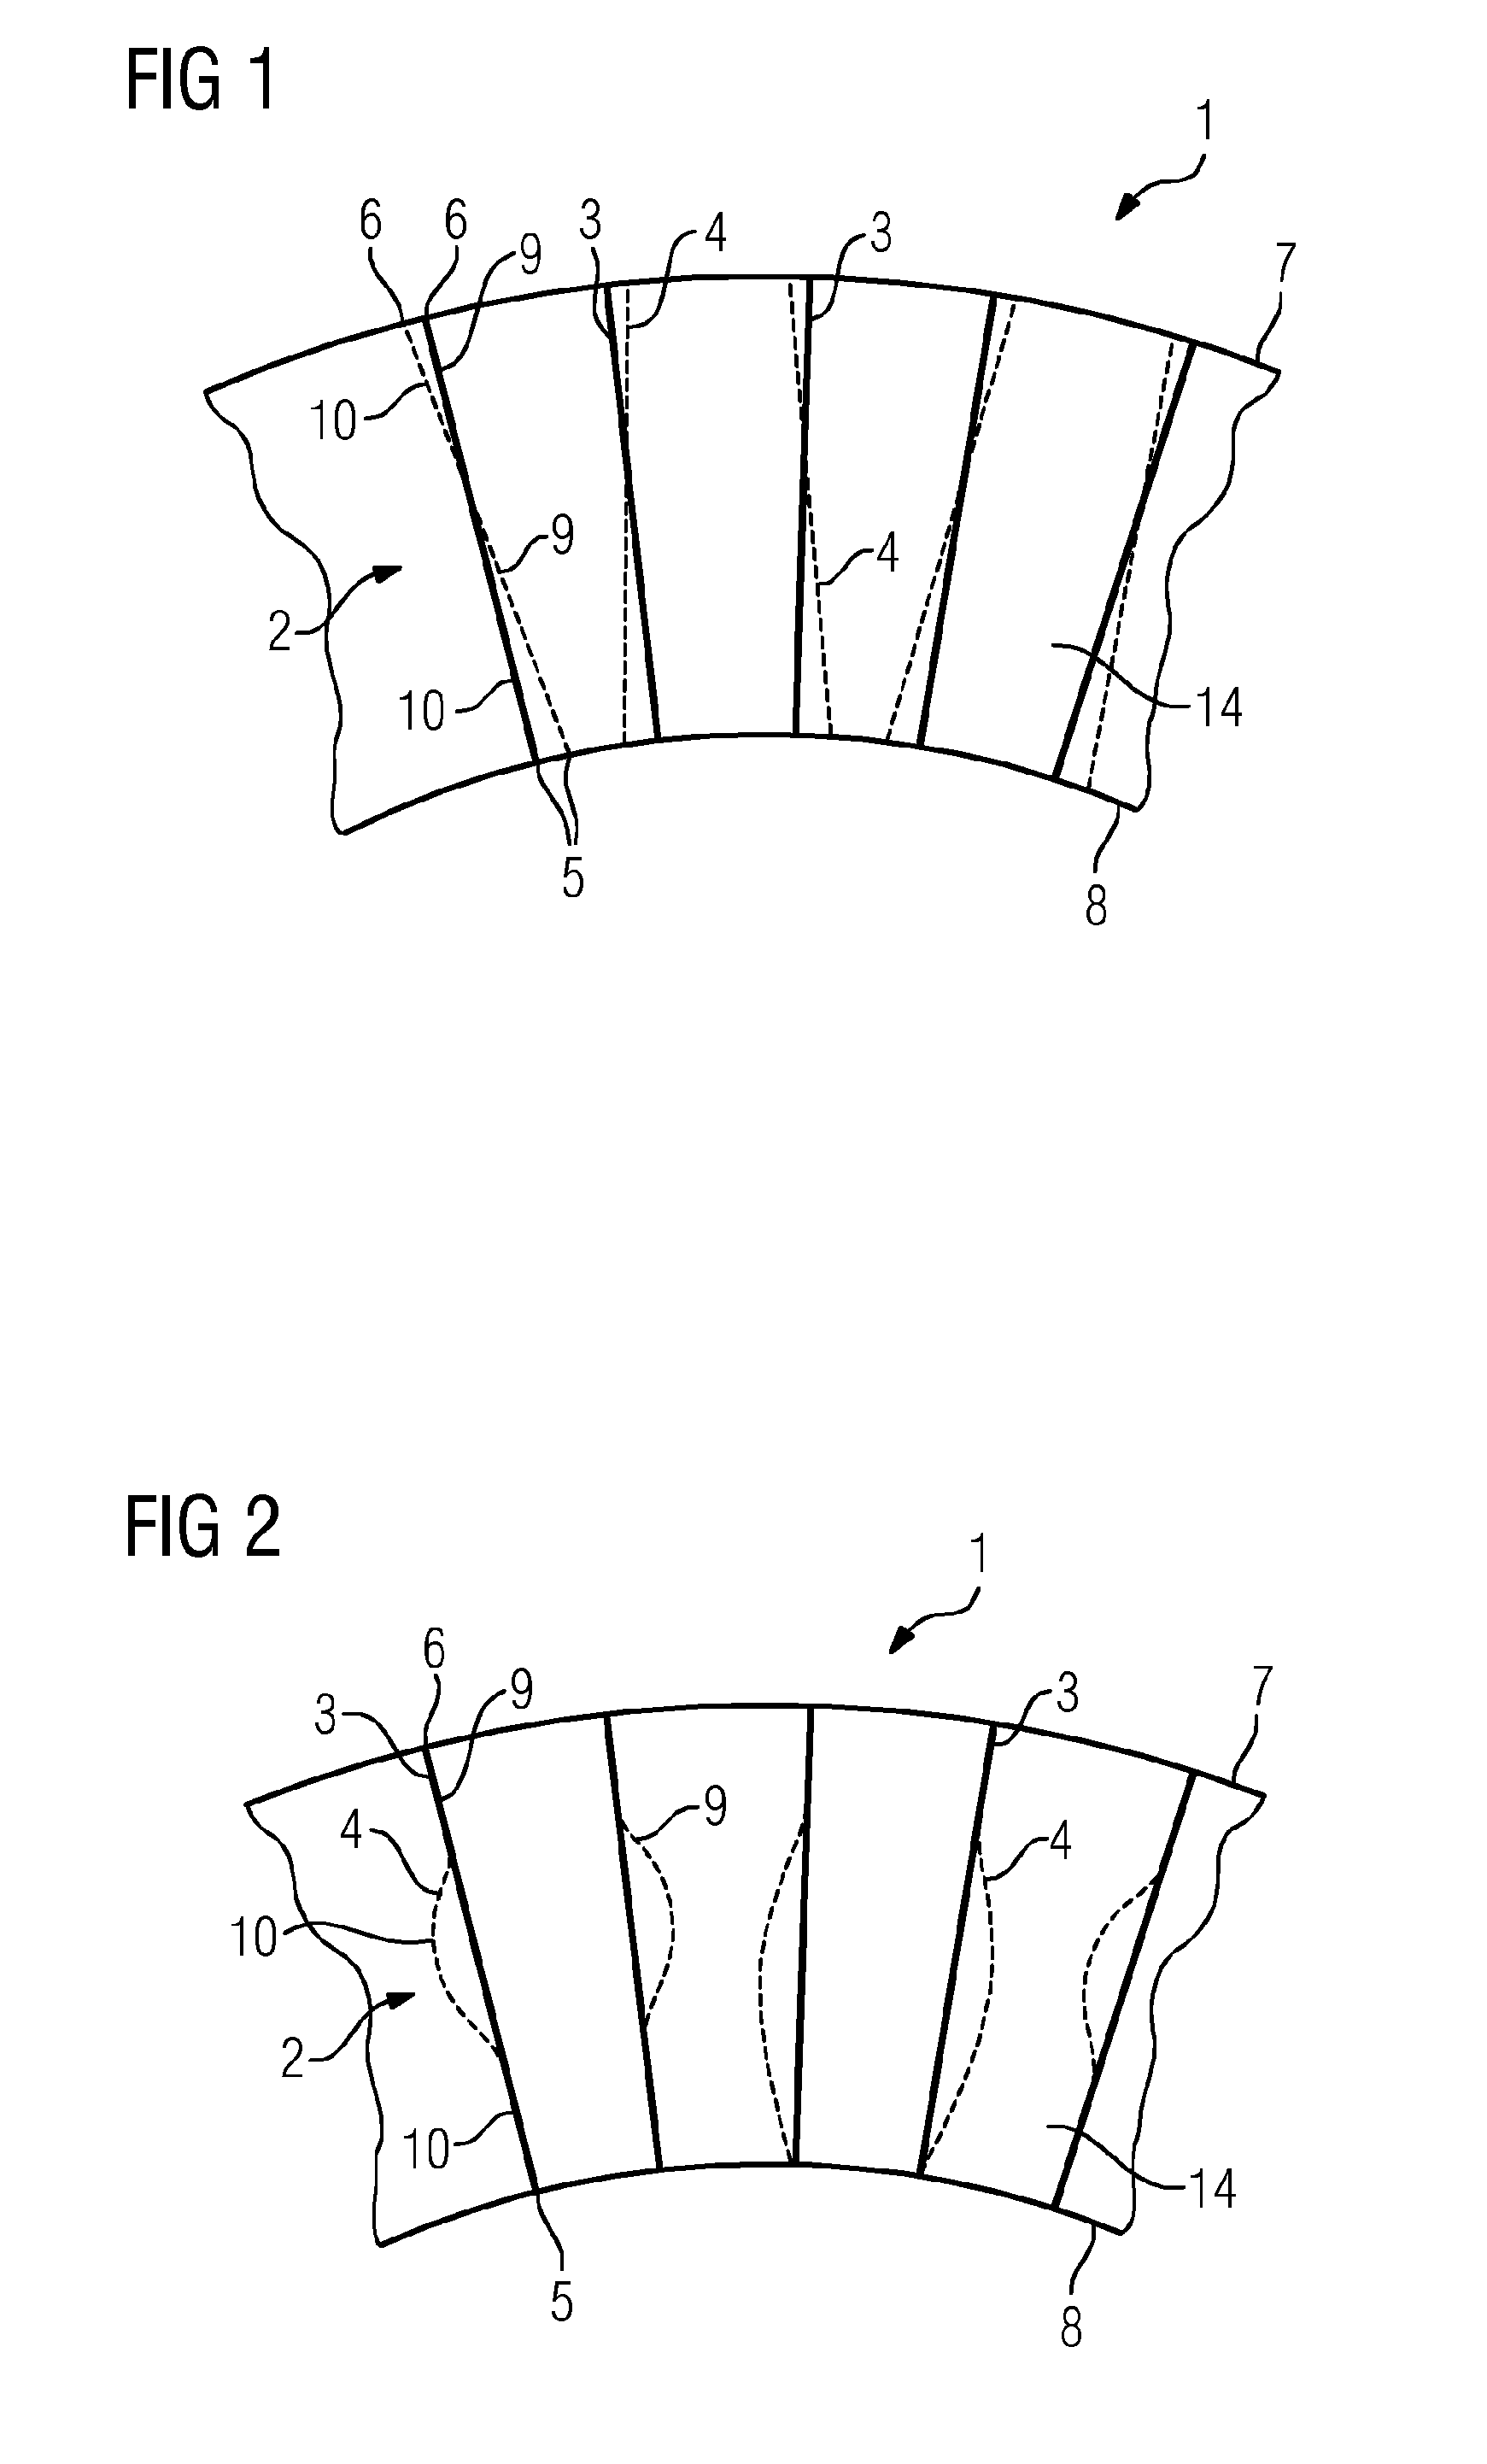 Guide blade ring for an axial turbomachine and method for designing the guide blade ring